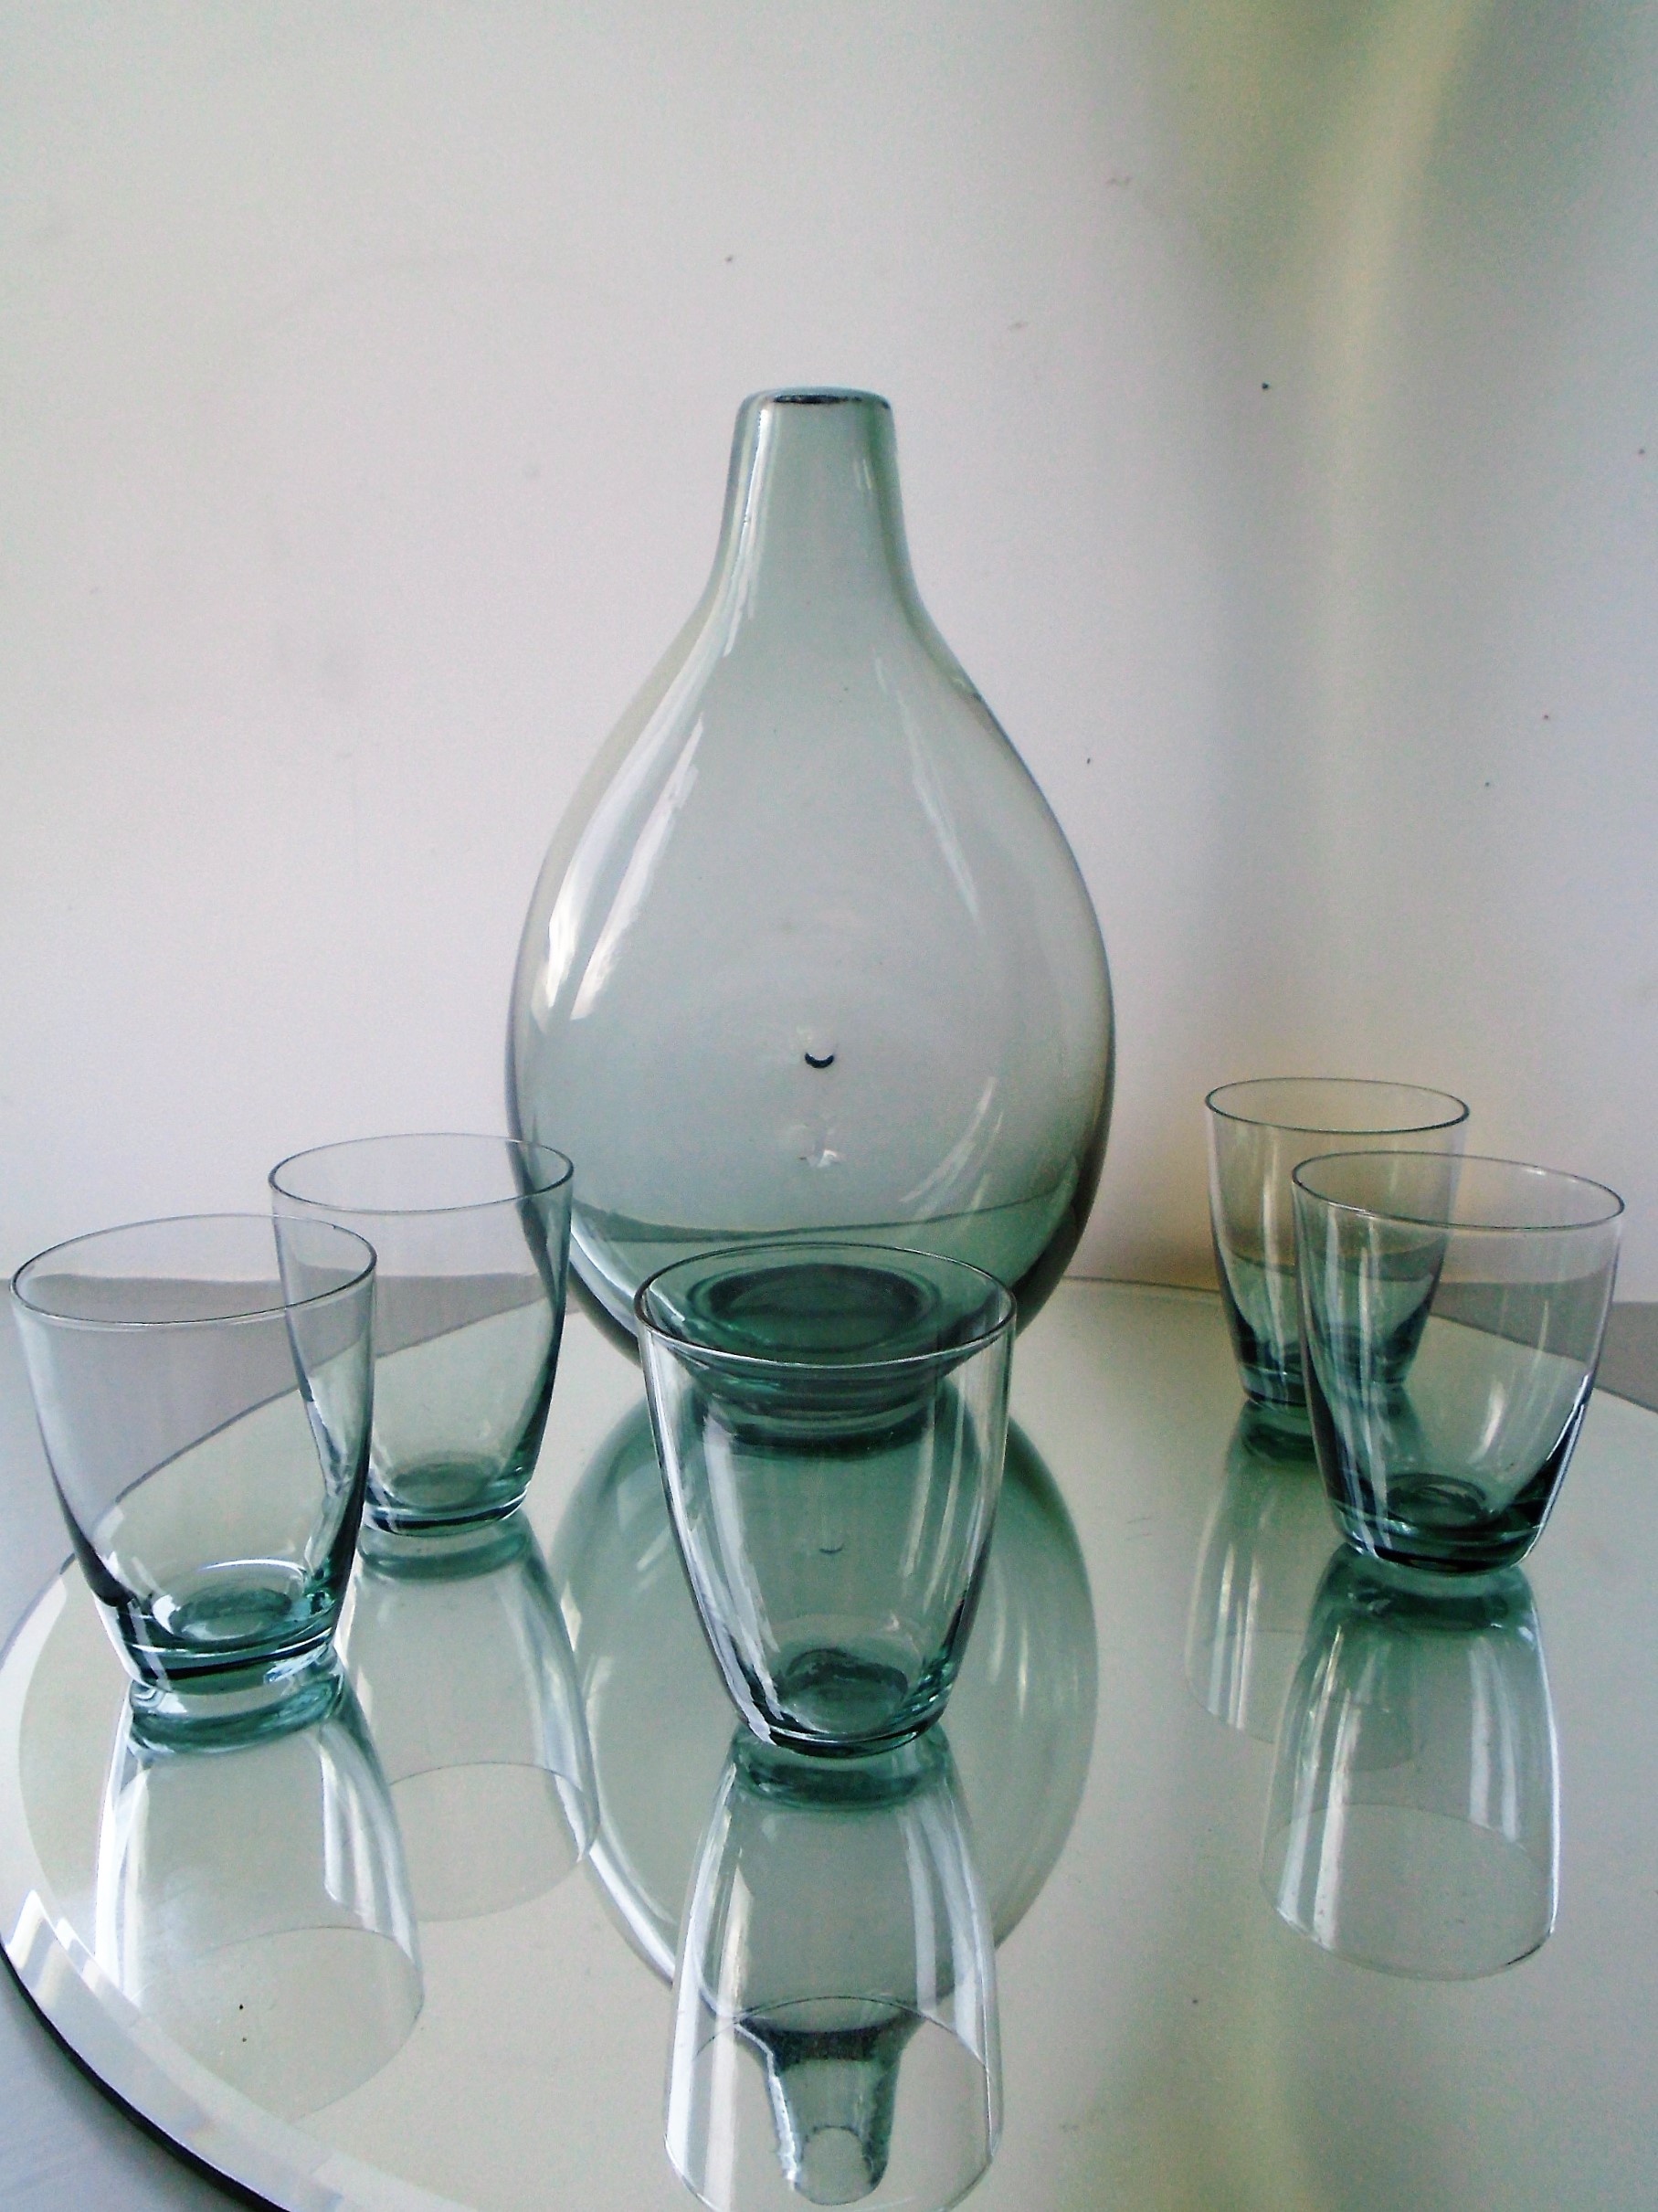 Vintage mould blown and pinched glass carafe with 5 shot glasses designed by Ronald Stennett Willson in 1954 and produced by Swedish Company Bjorkshult and distributed by Wuidart&Co between 1955-1957 